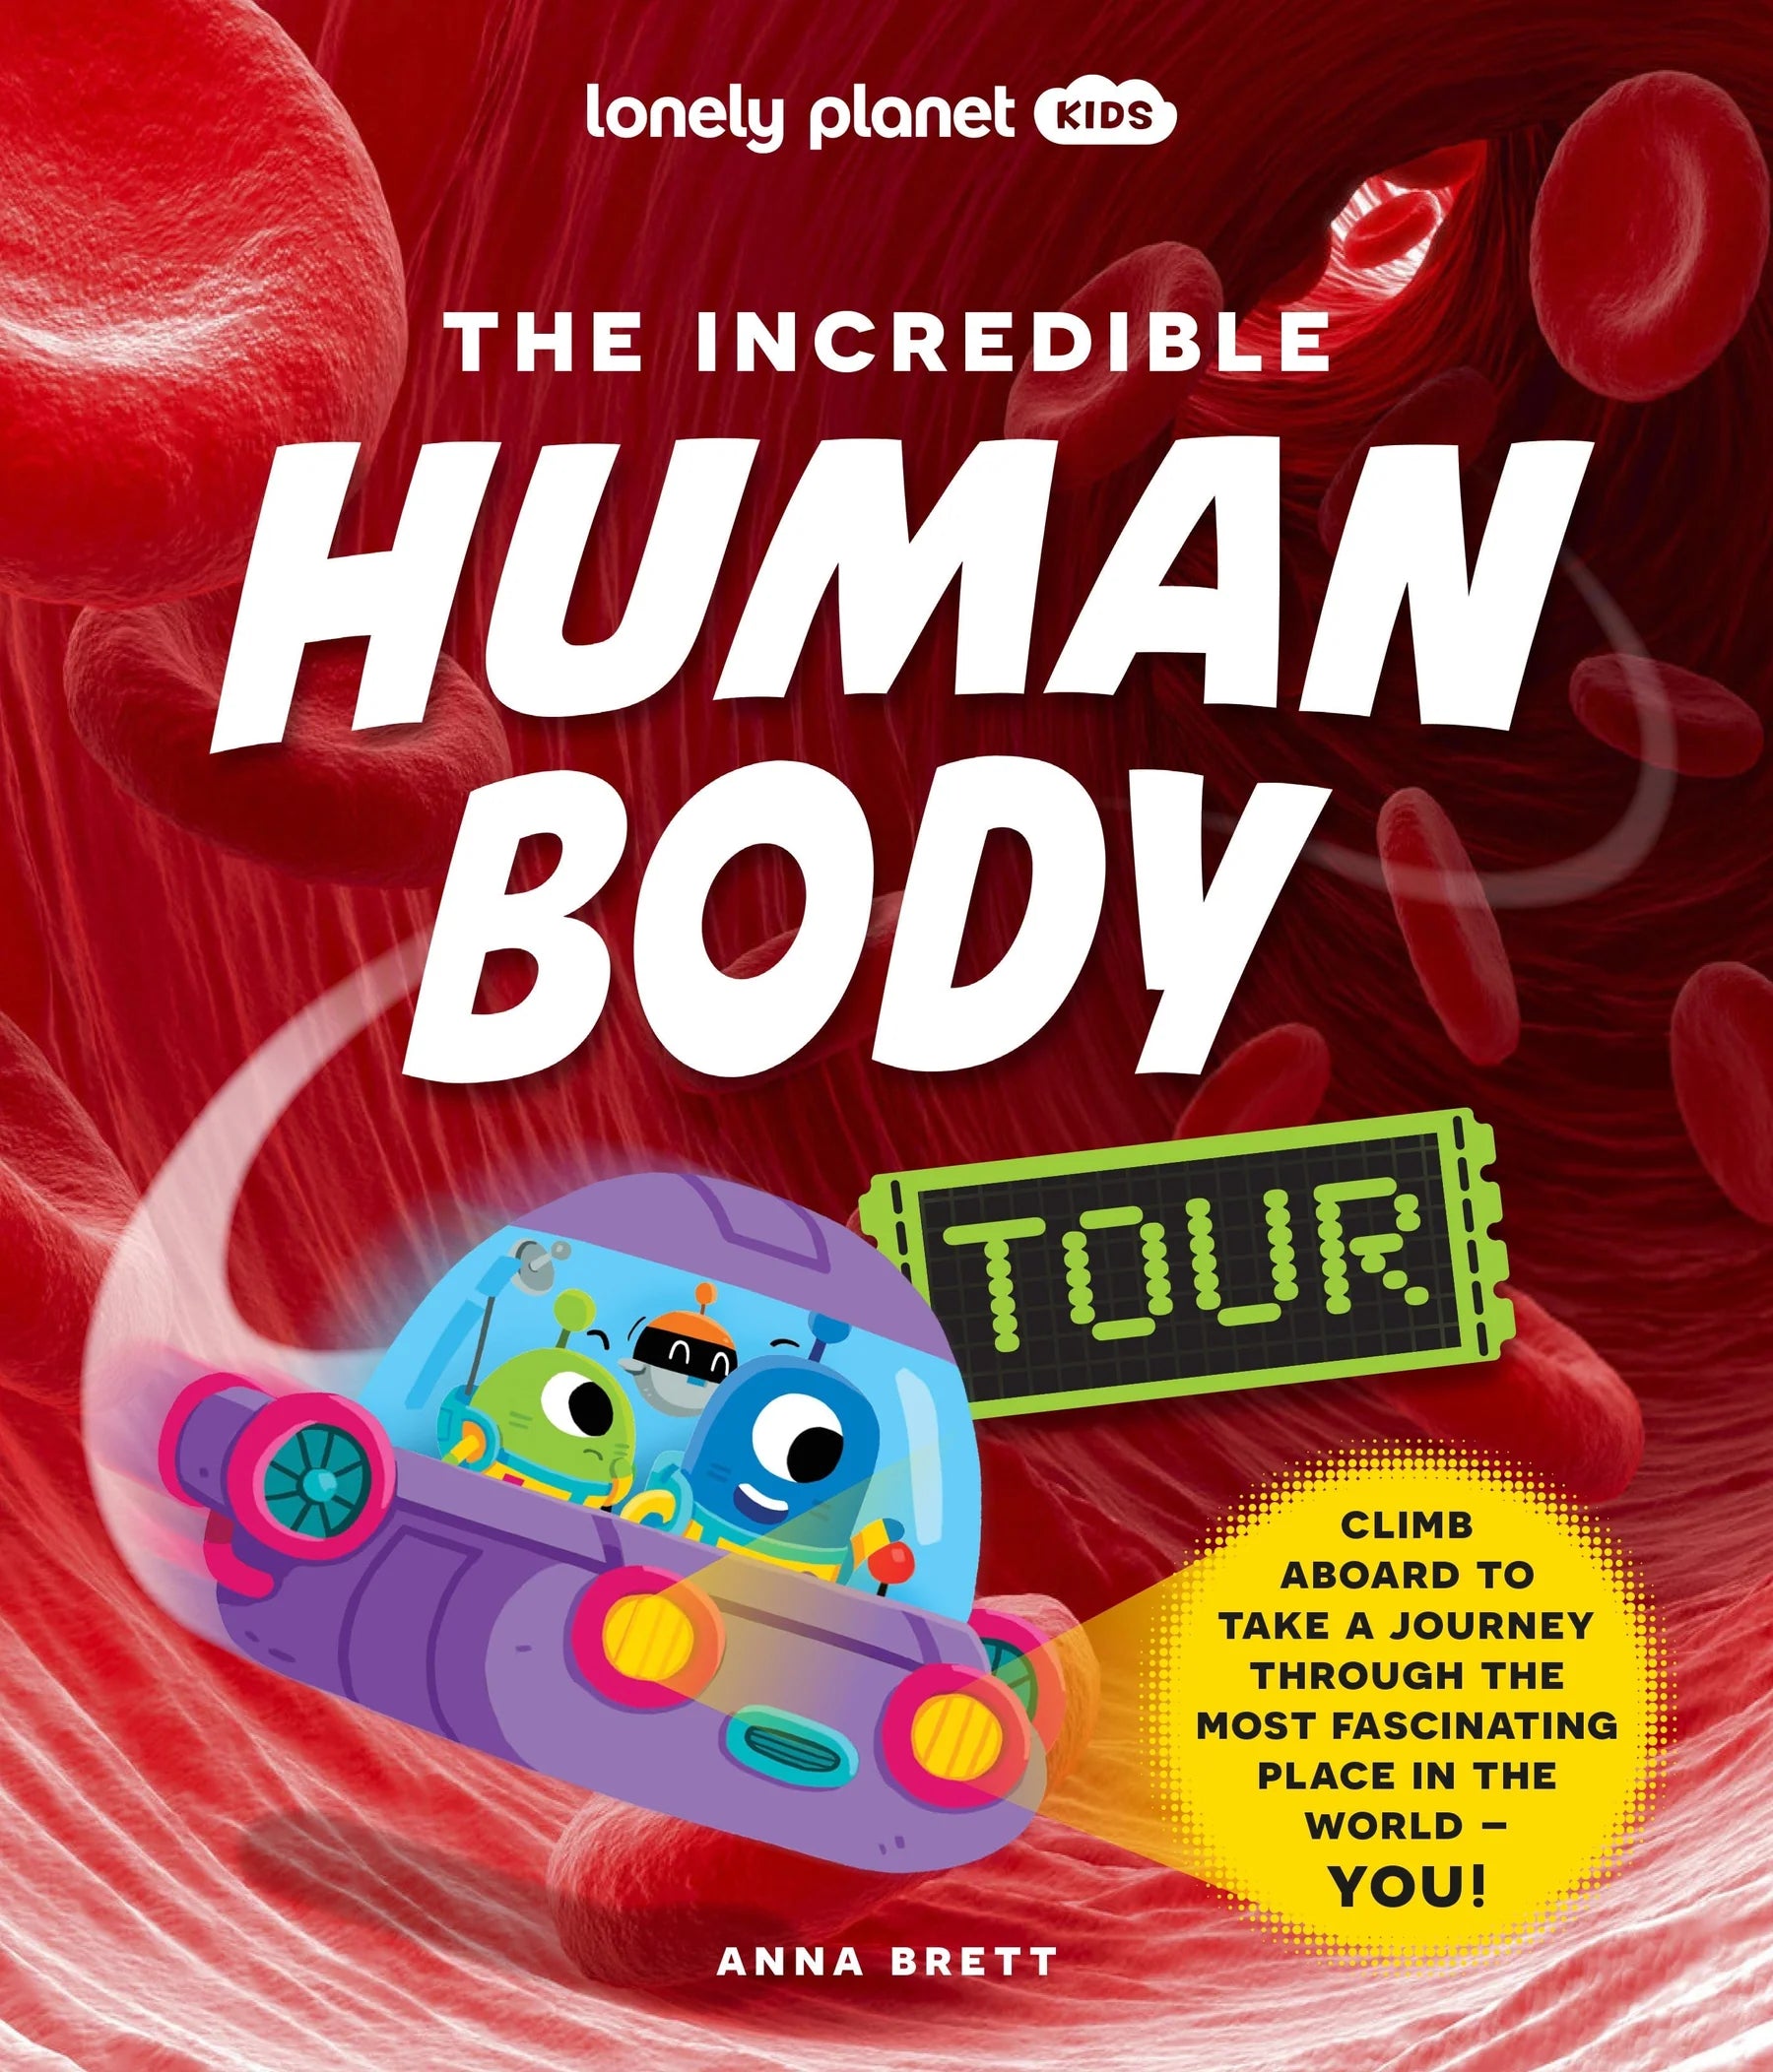 Lonely Planet Kids | The Incredible Human Body Tour